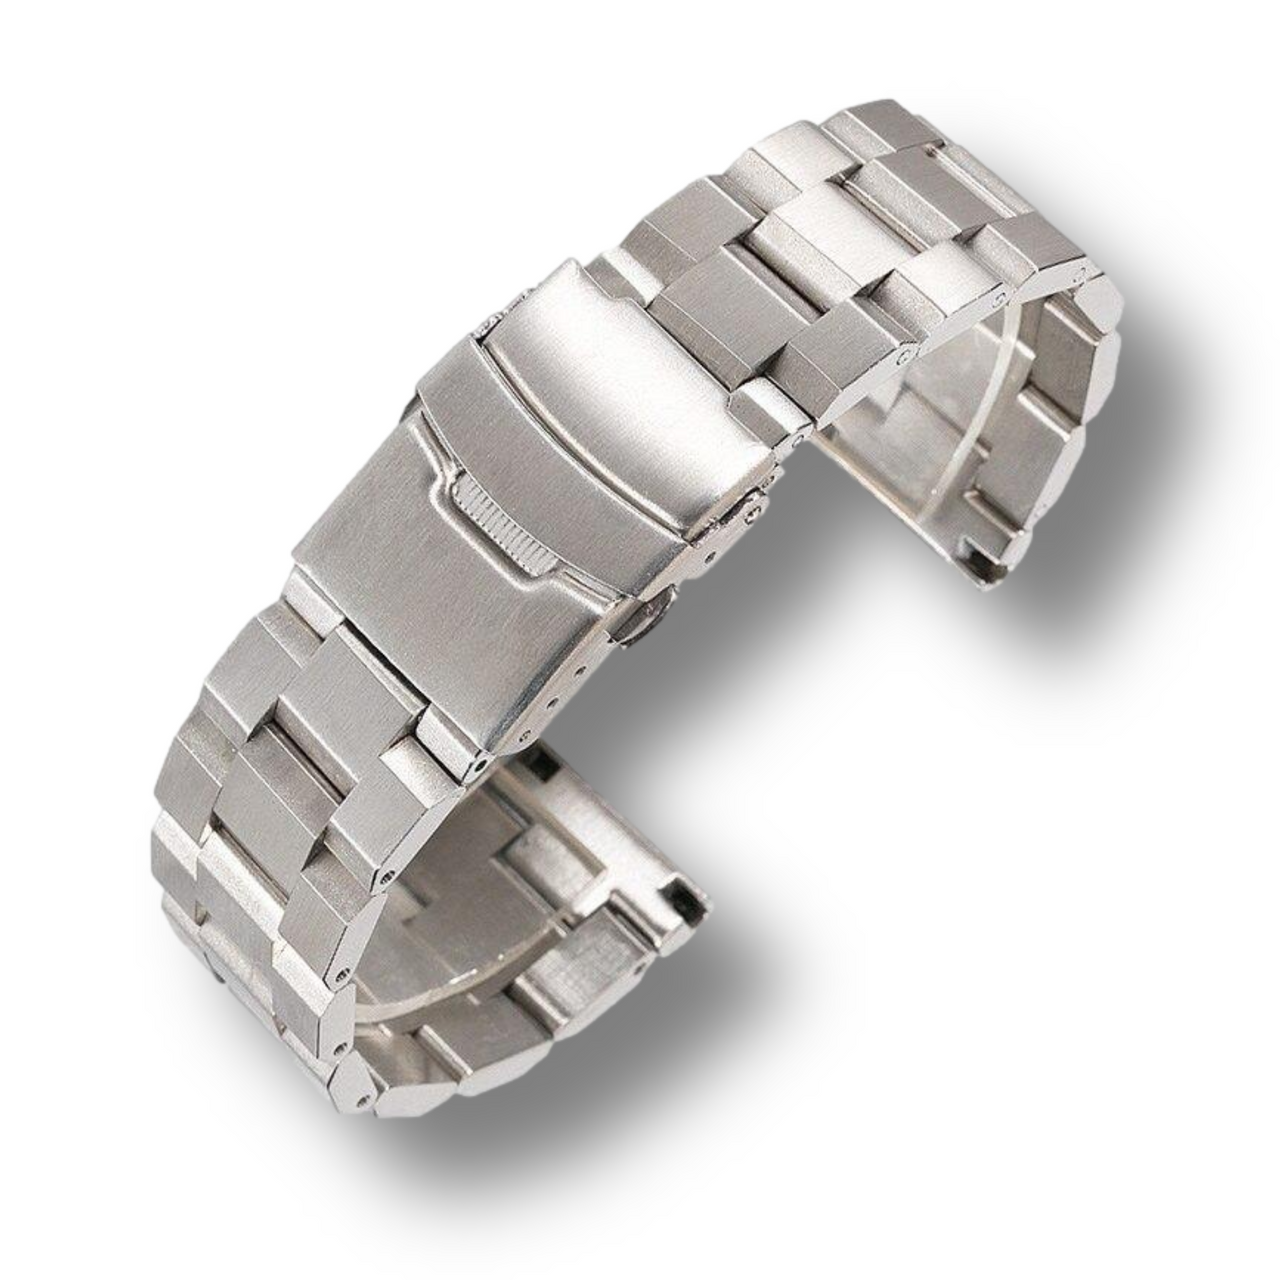 Cubic Link Solid Stainless Steel Strap - watchband.direct